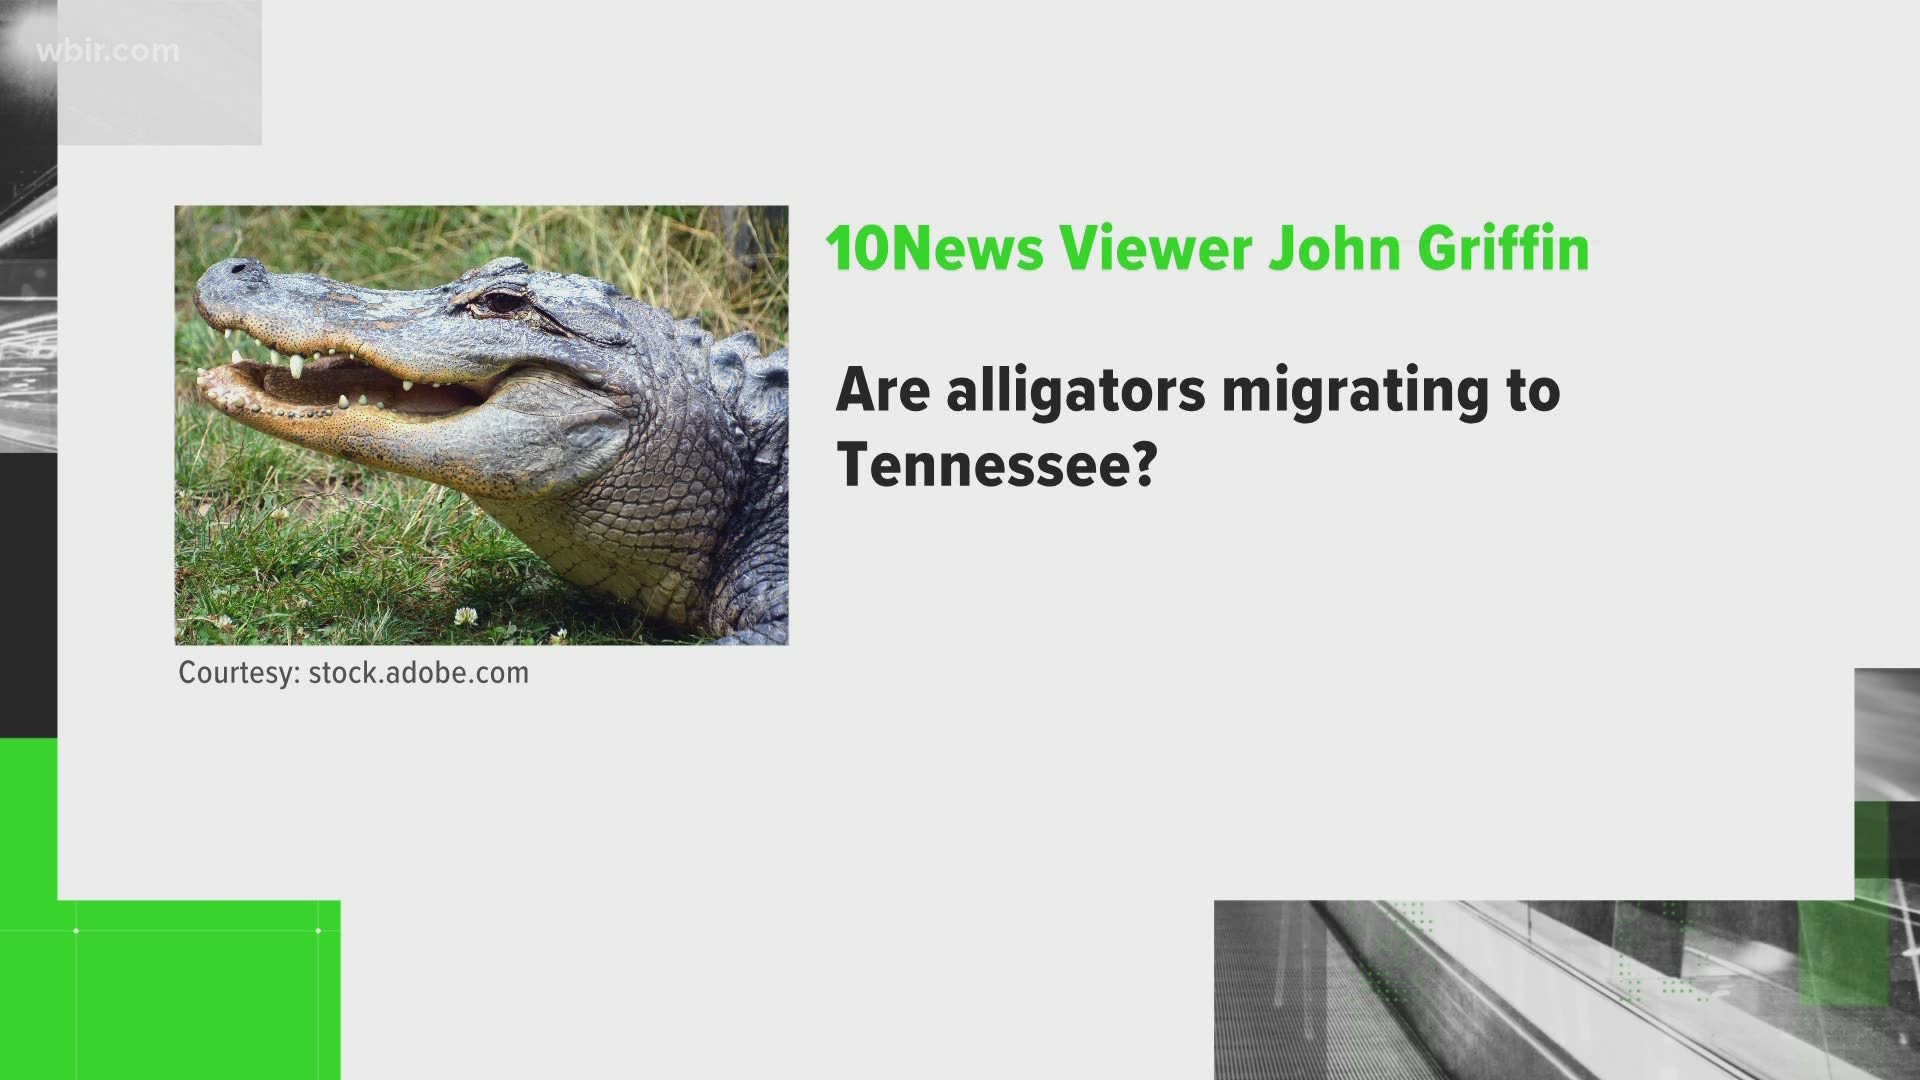 There are a lot of animals that call East Tennessee home, but some viewers wanted to know if some new creatures were migrating to Tennessee.